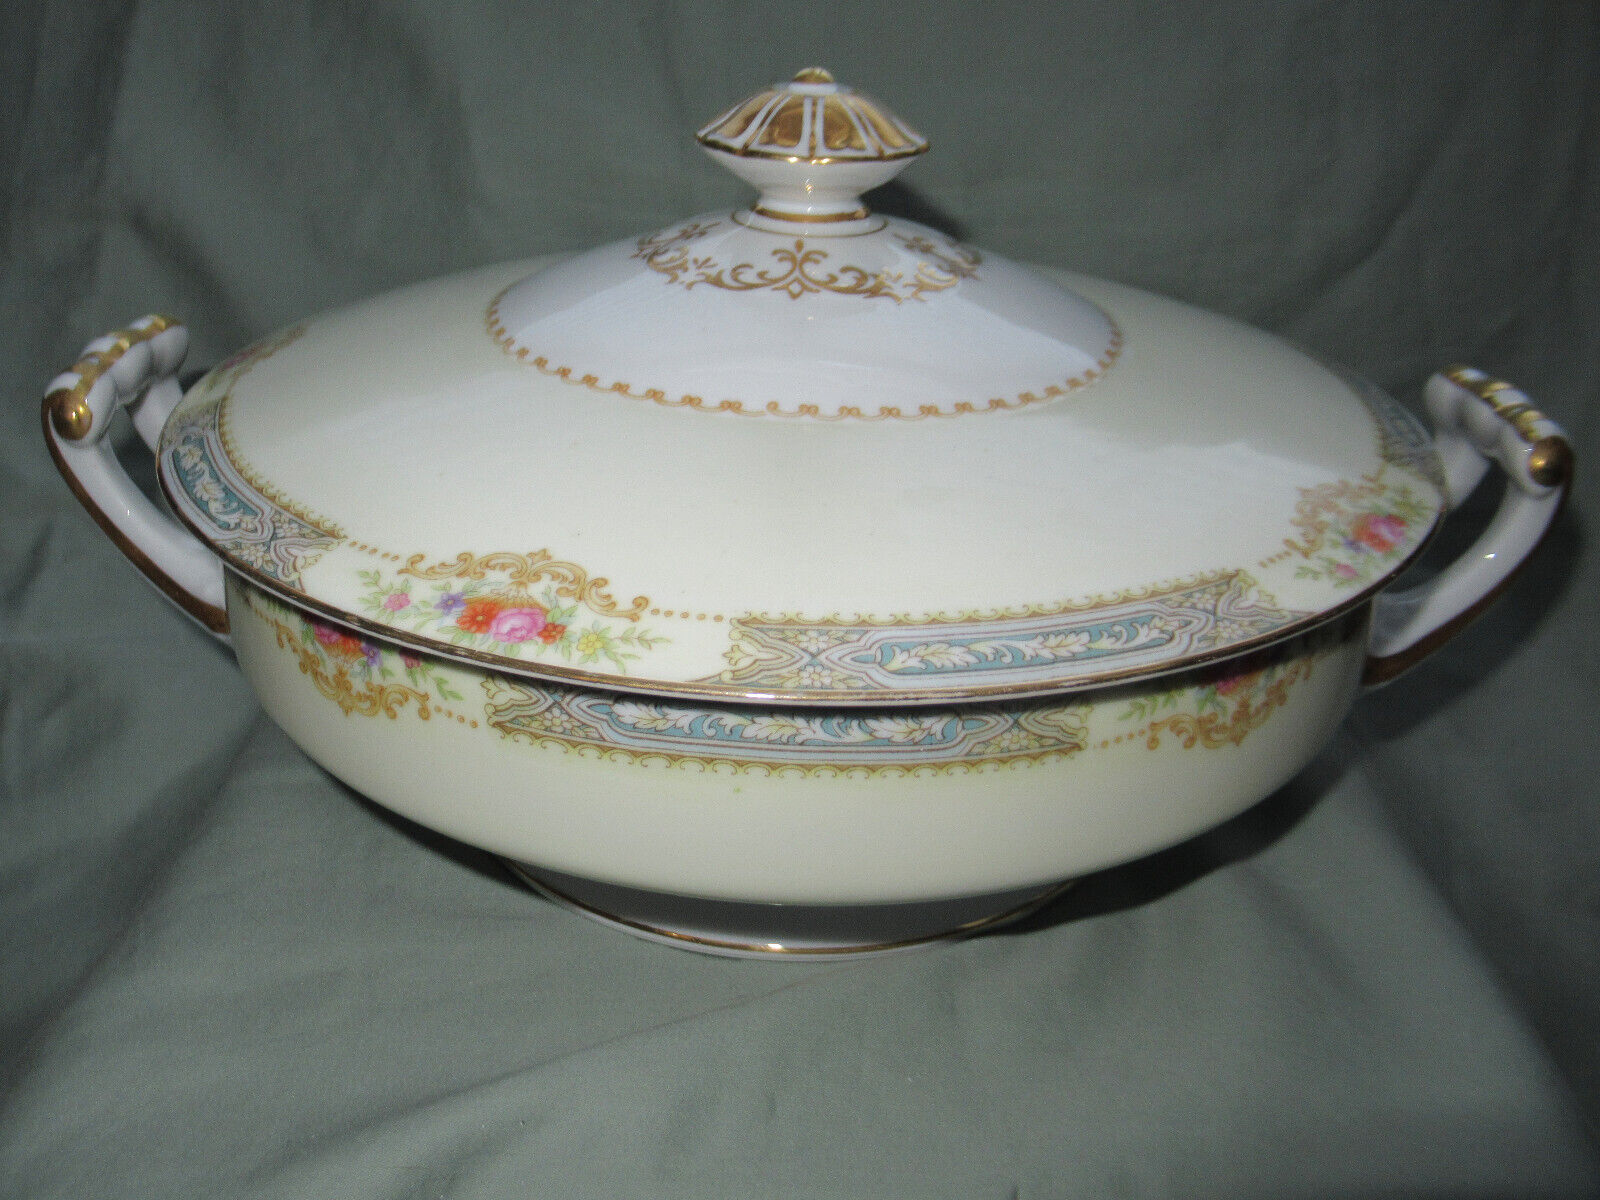 NORITAKE ROSE CHINA OCCUPIED JAPAN ANNETTE PATTERN COVERED FOOTED VEGETABLE BOWL